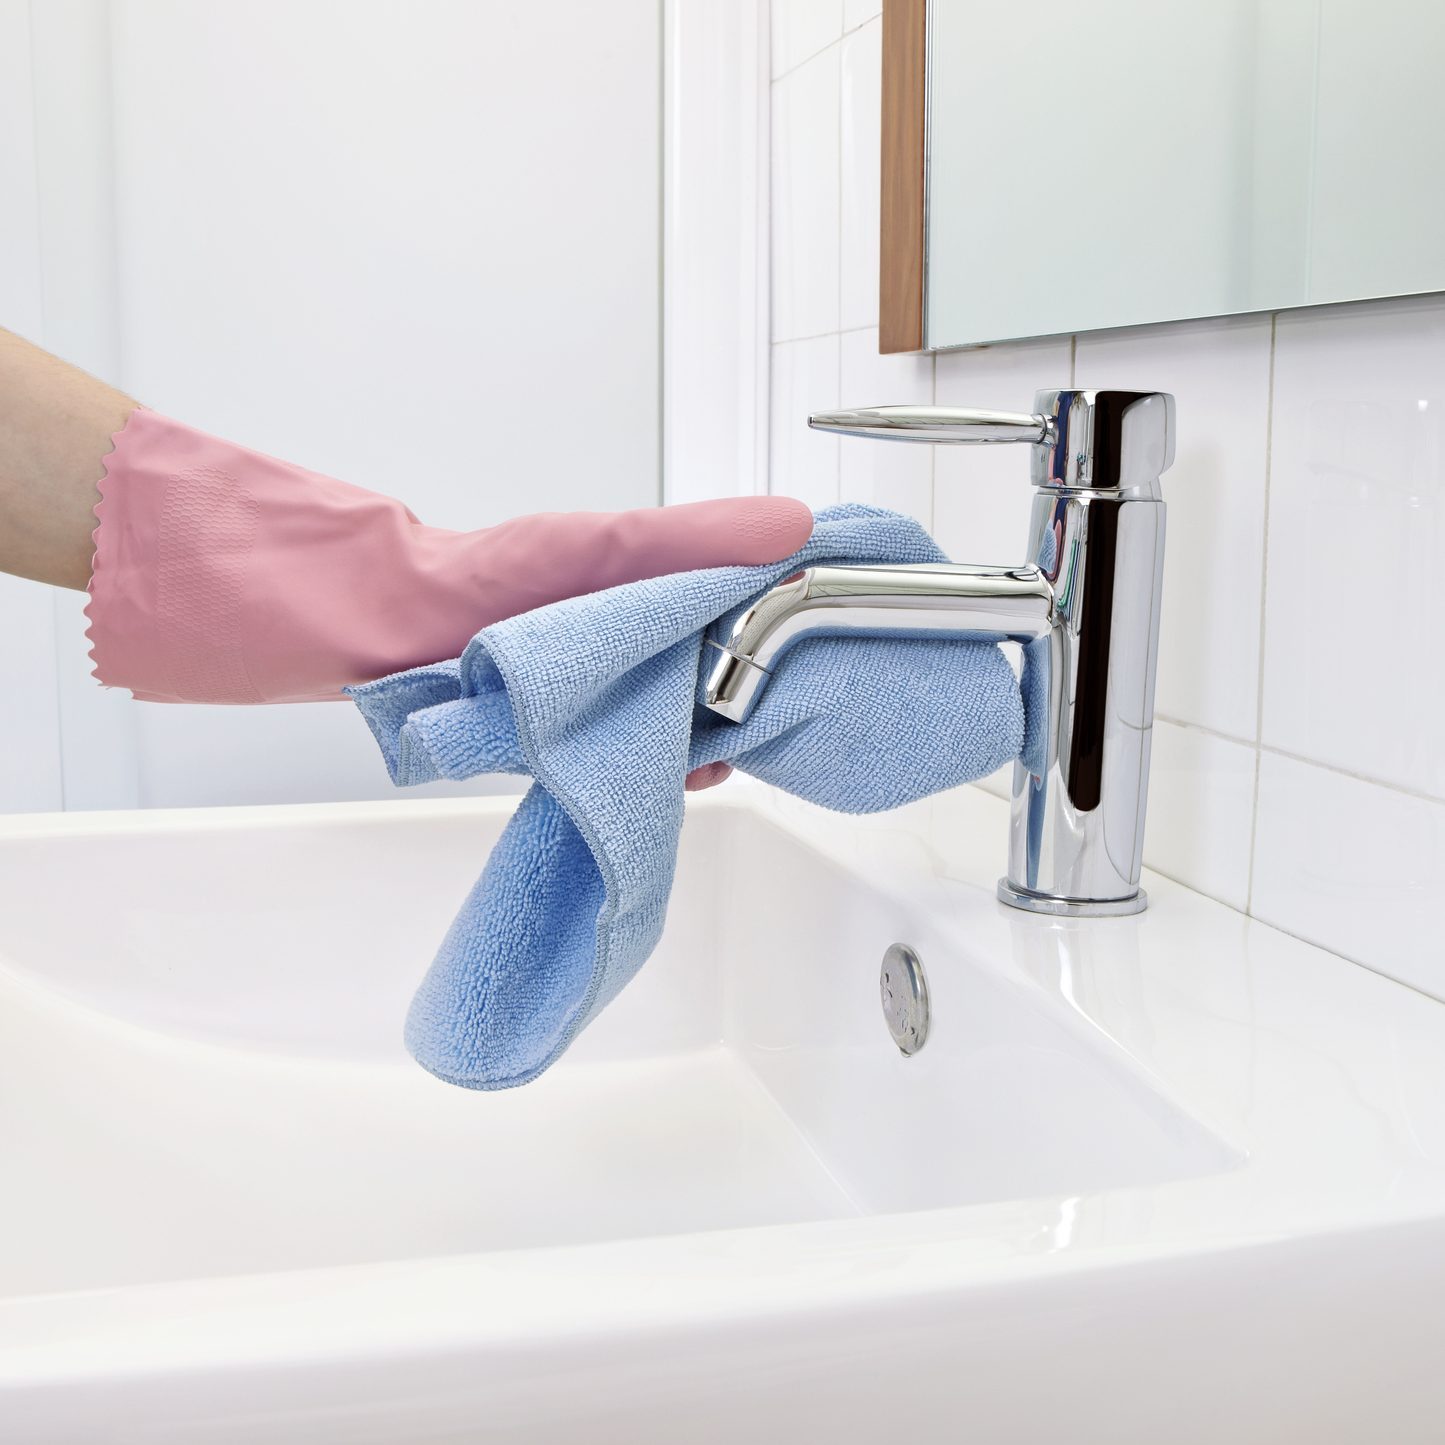 How to use a microfiber cloth to clean your home